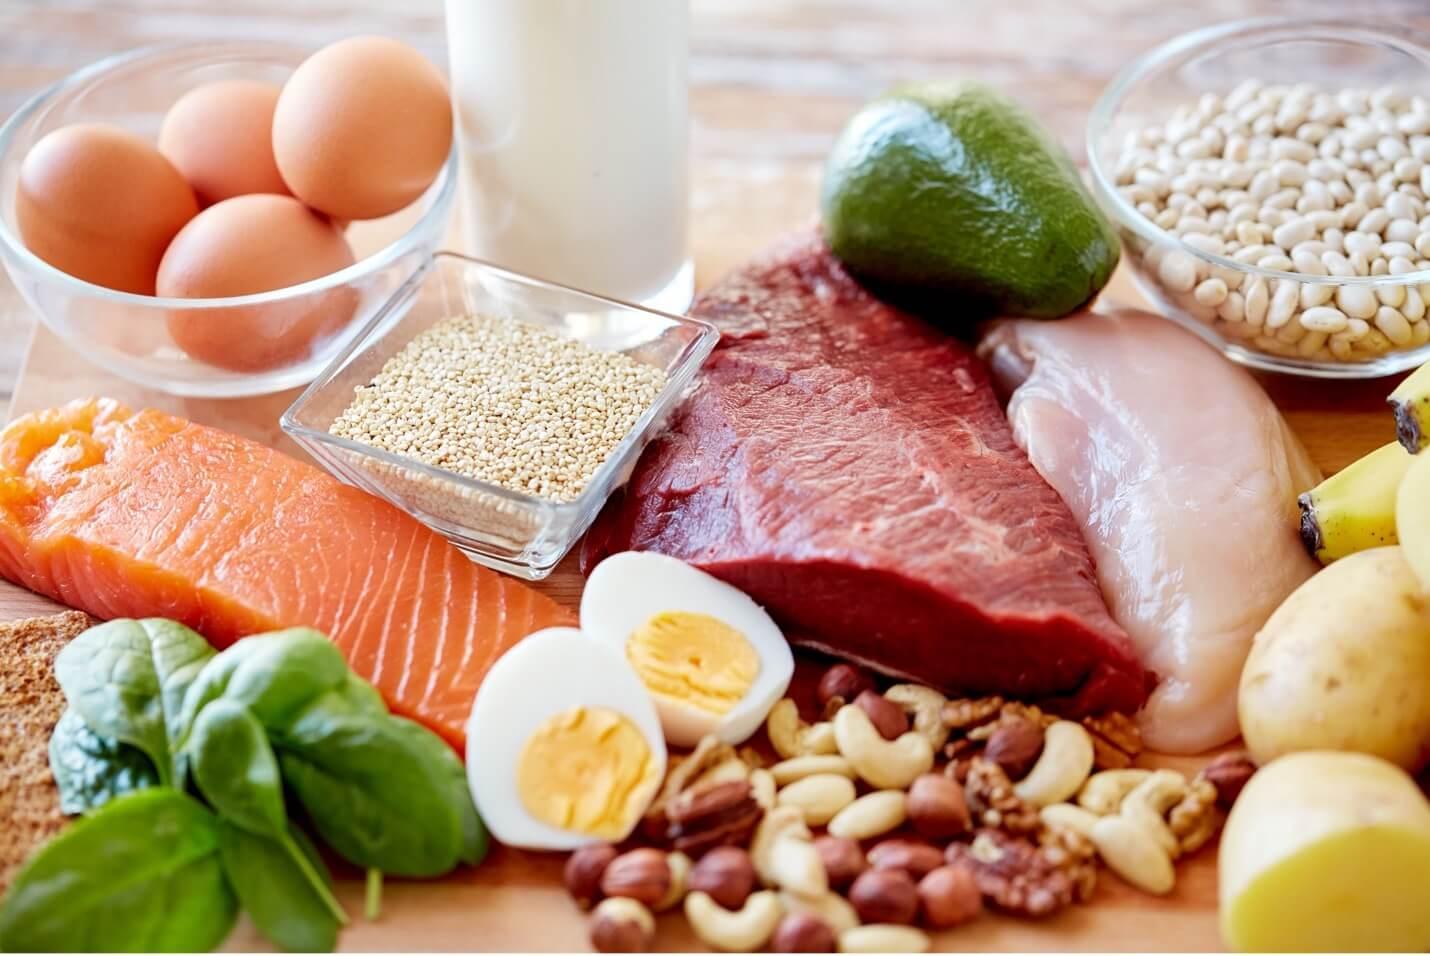 Protein, The Nutrition Source